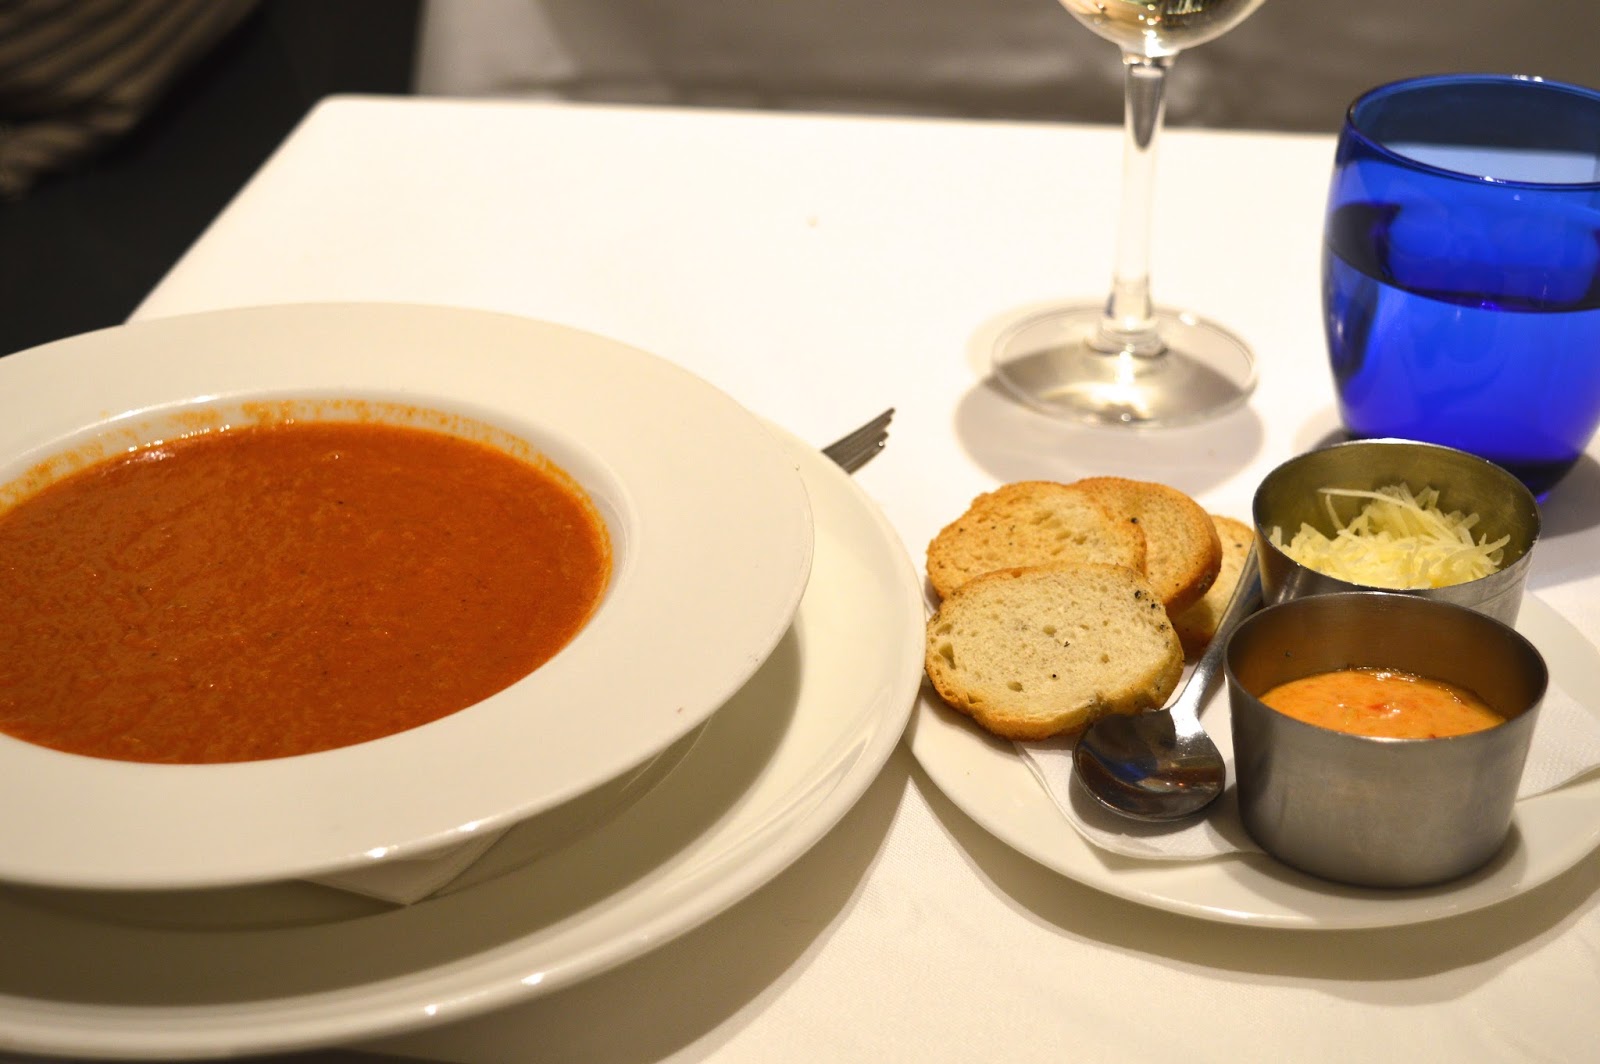 Rick Stein Winchester review, Rick Stein restaurant, food bloggers, Hampshire food blogger